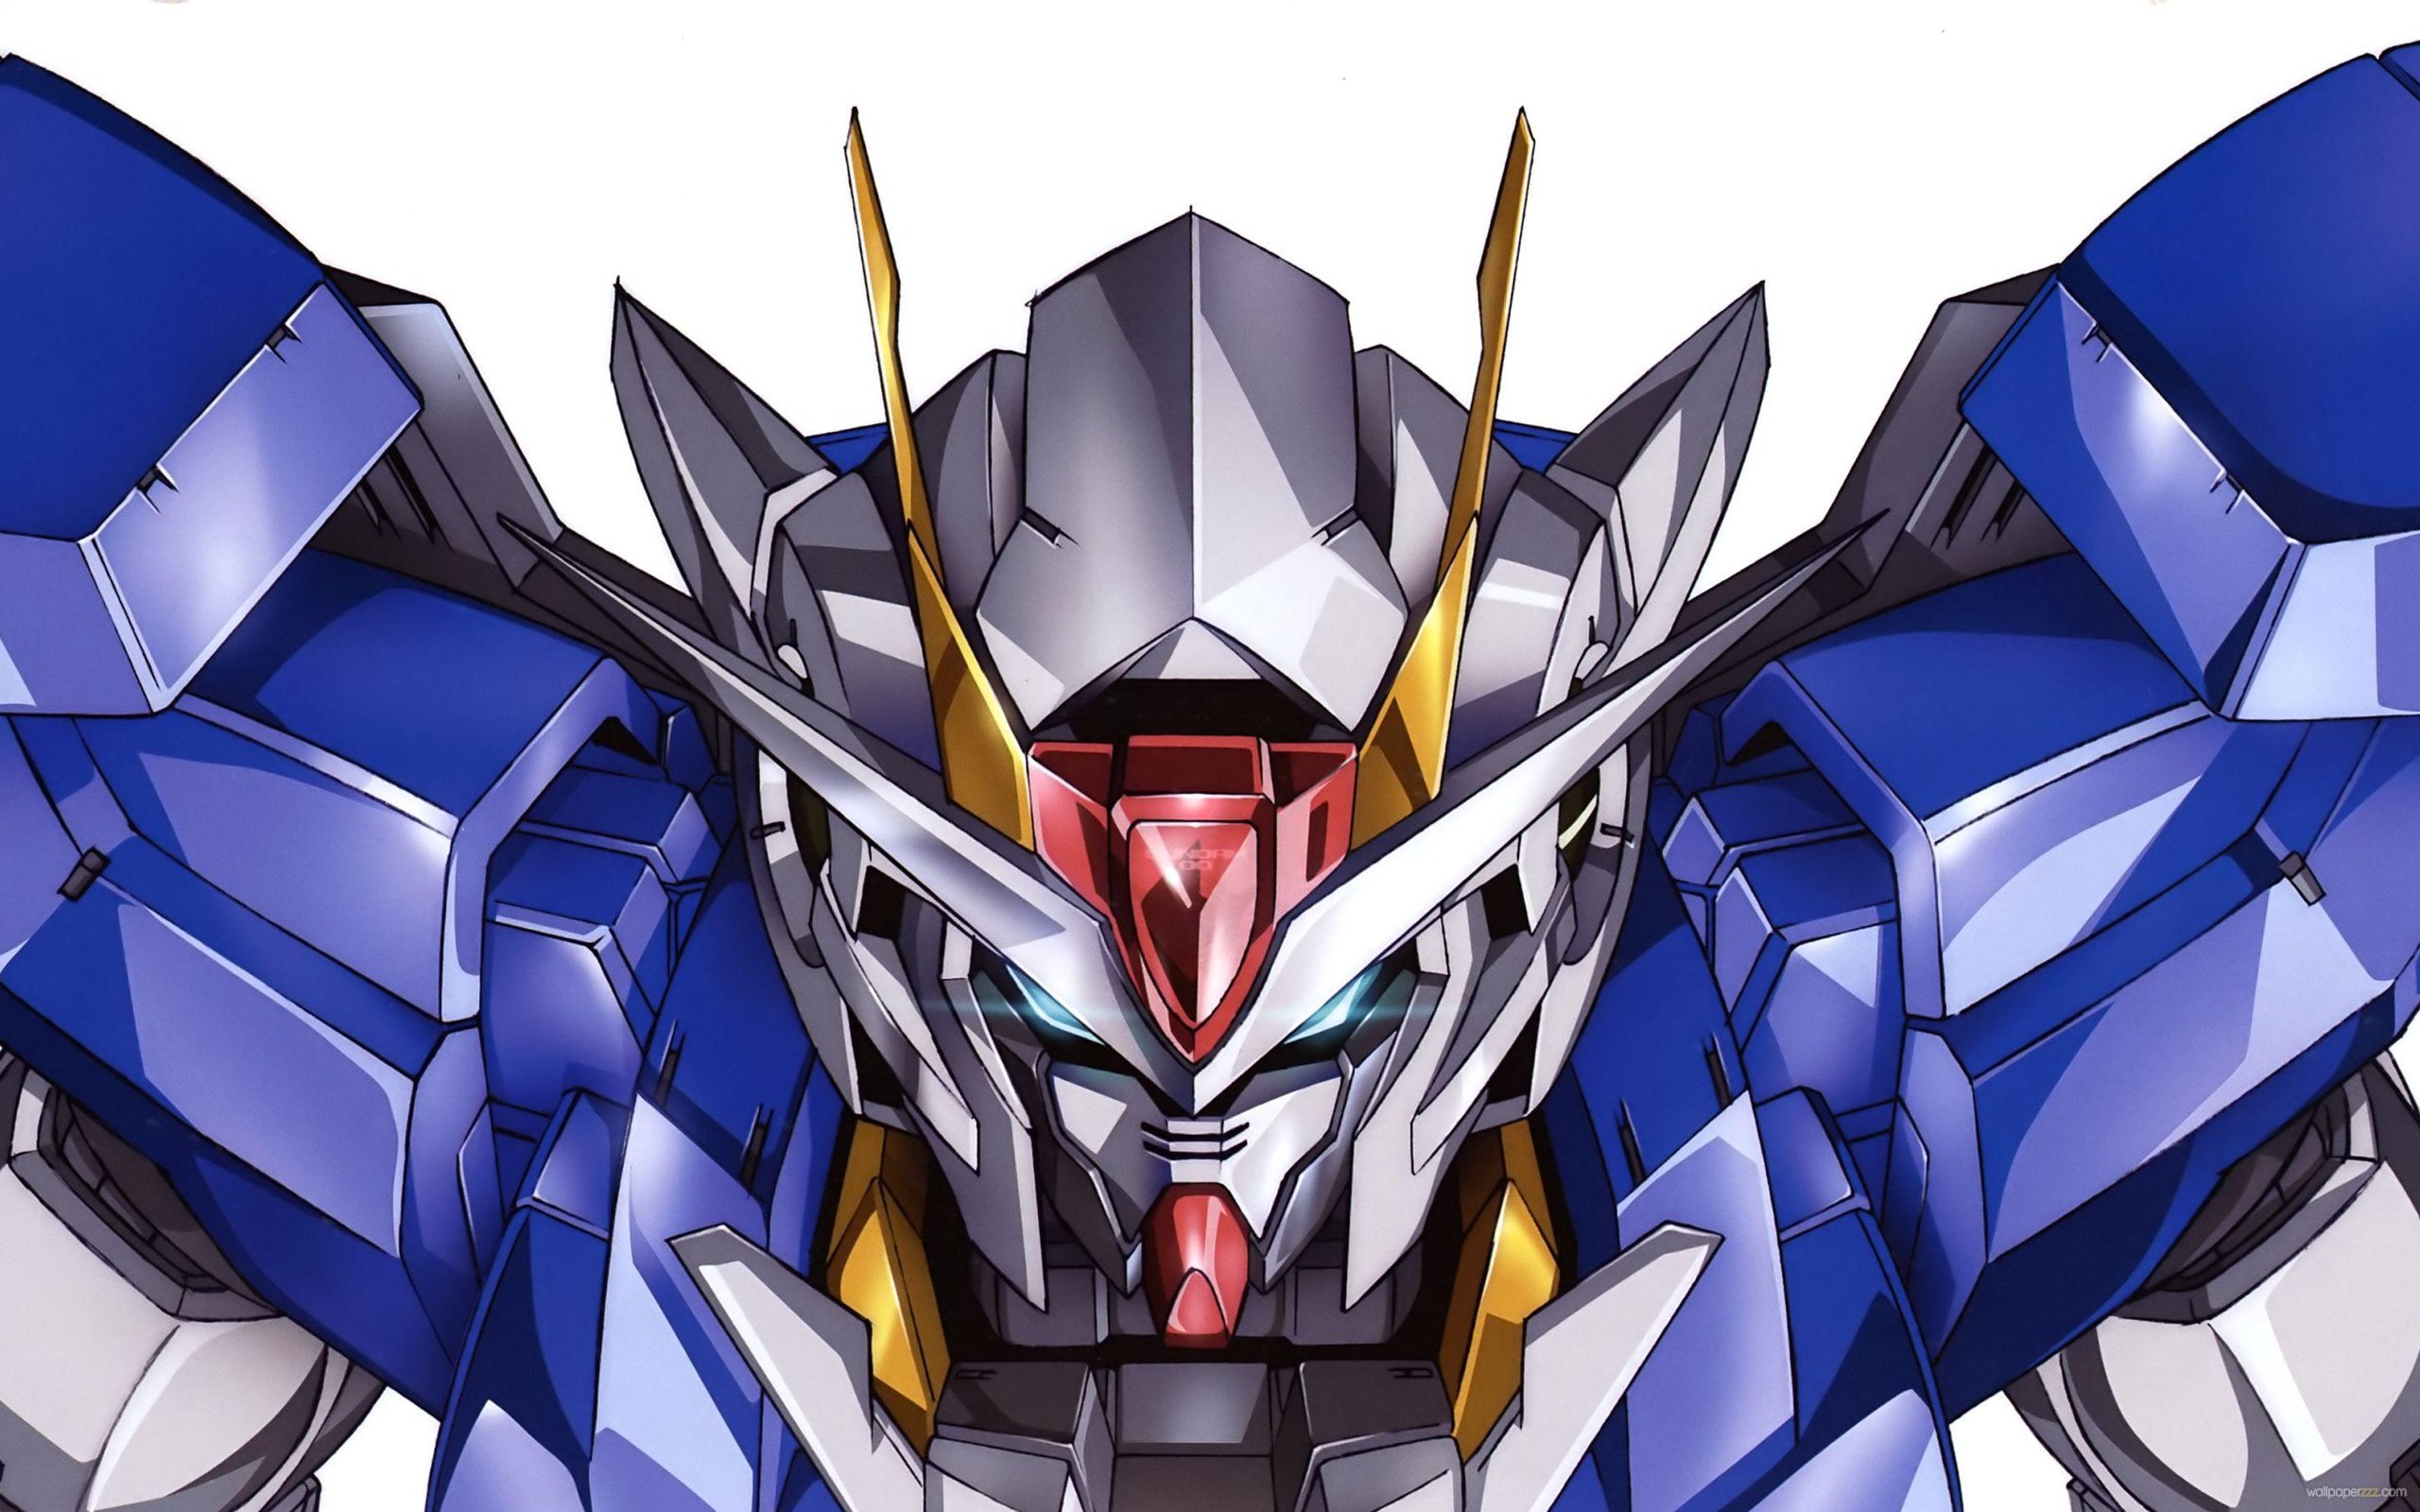 Geek insider, geekinsider, geekinsider. Com,, 5 things we need to see in rumored live-action gundam movie, comics